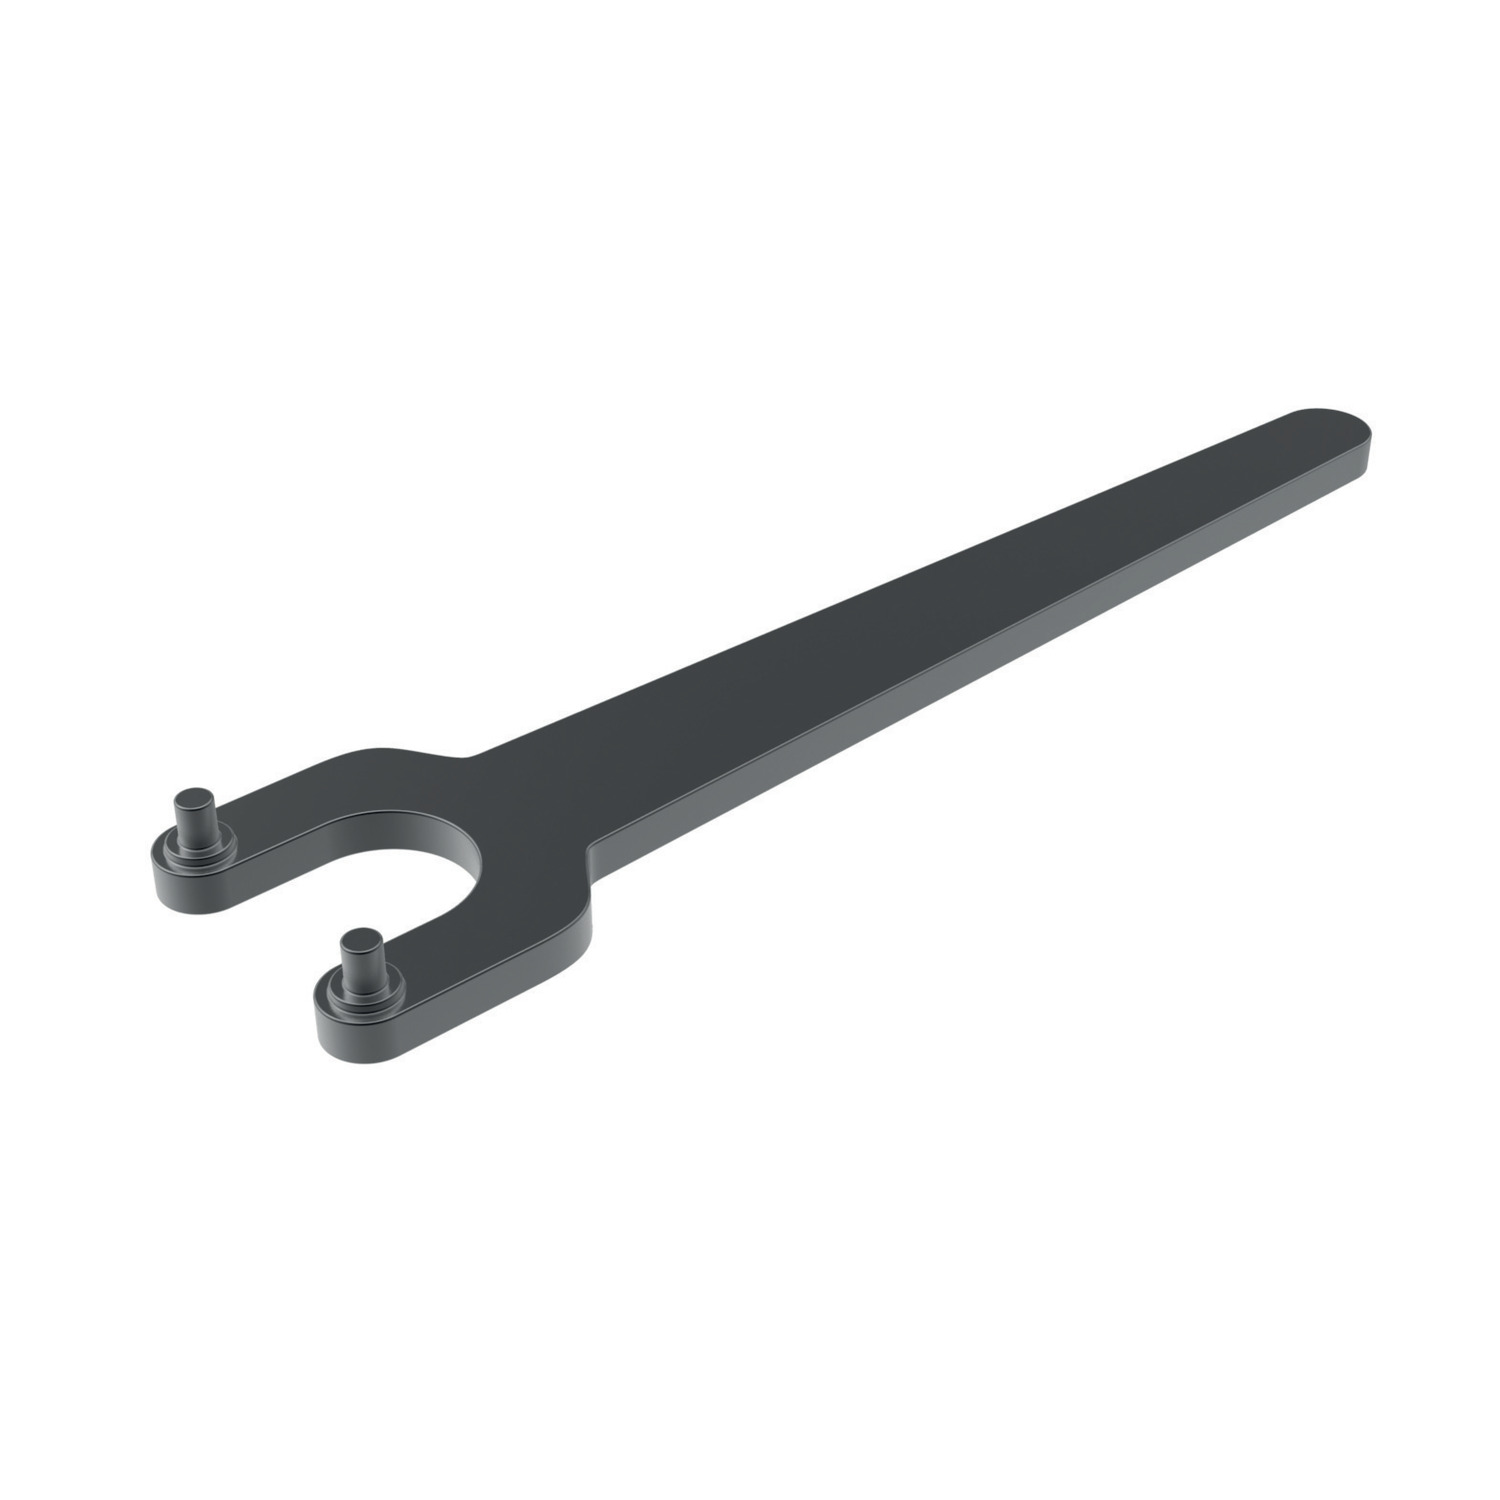 Product 95340, Face Spanner - with Pins fixed / 